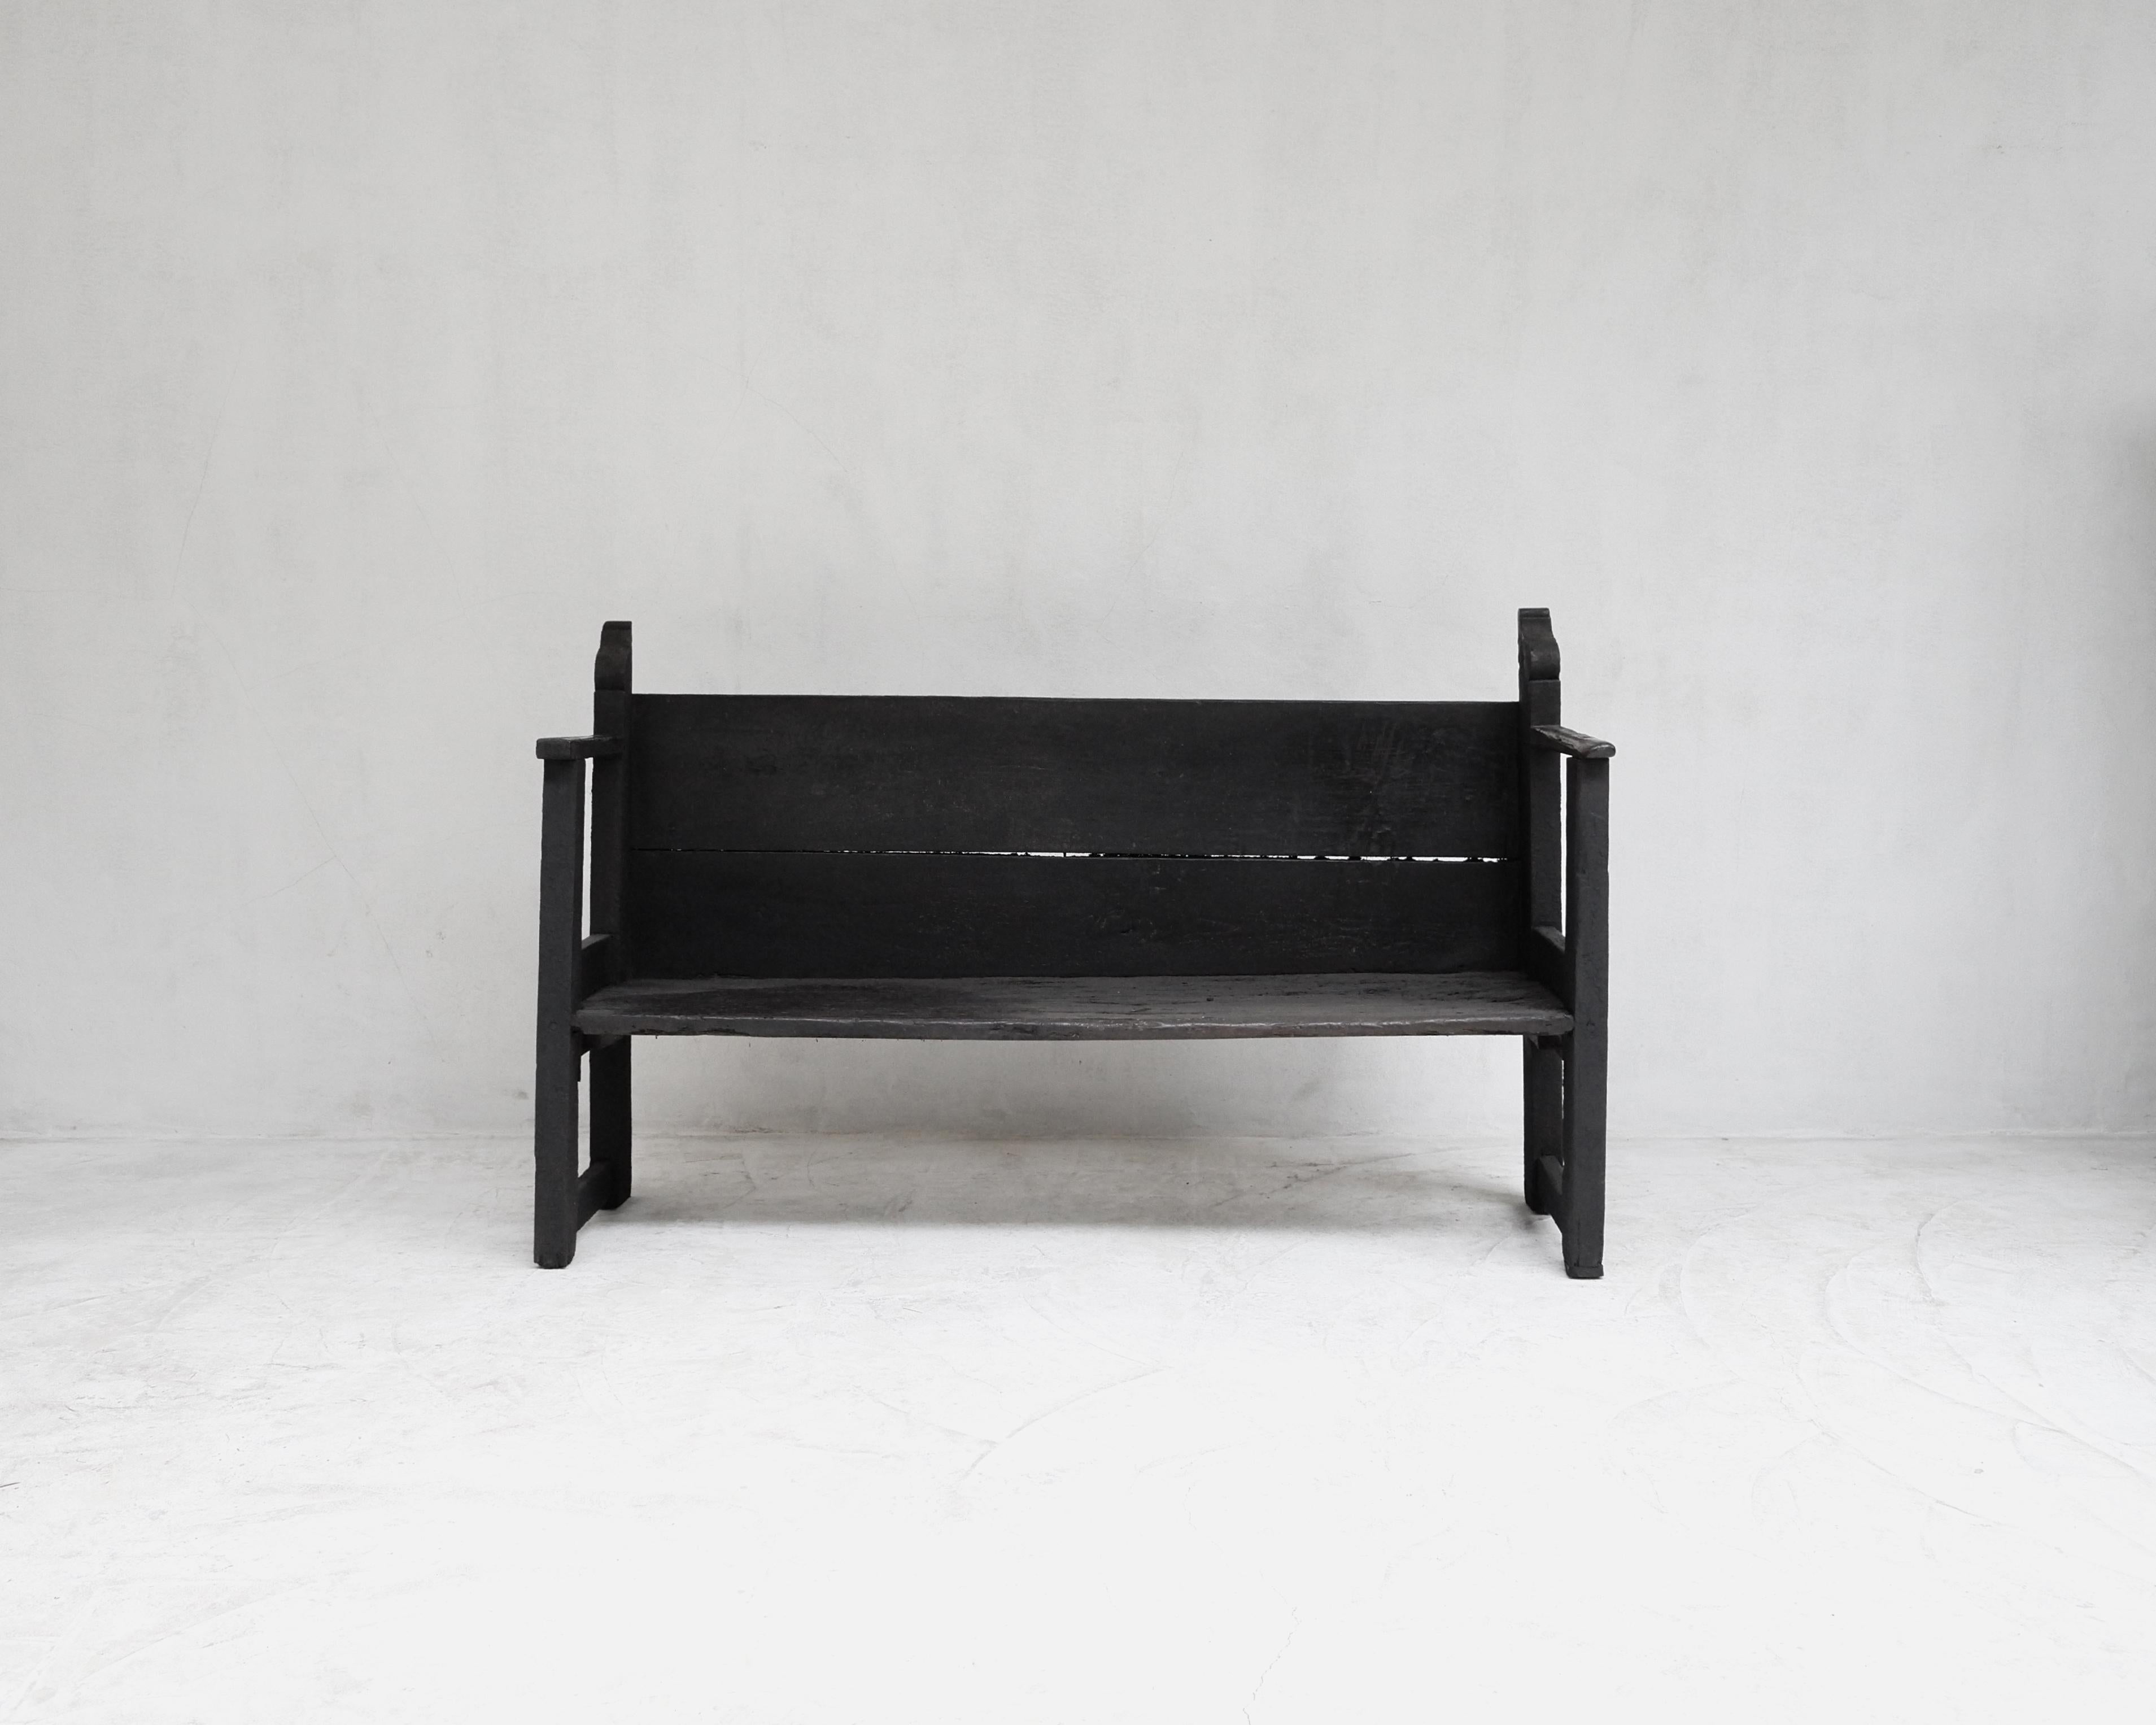 Imposing 17th C. bench from Galicia. Heavily patinated chestnut construction with signs of wear and make do repair over its 300 + year life. 

Simple yet highly aesthetic.

-

We offer free shipping to the USA/Canada through Fedex with this item.
  